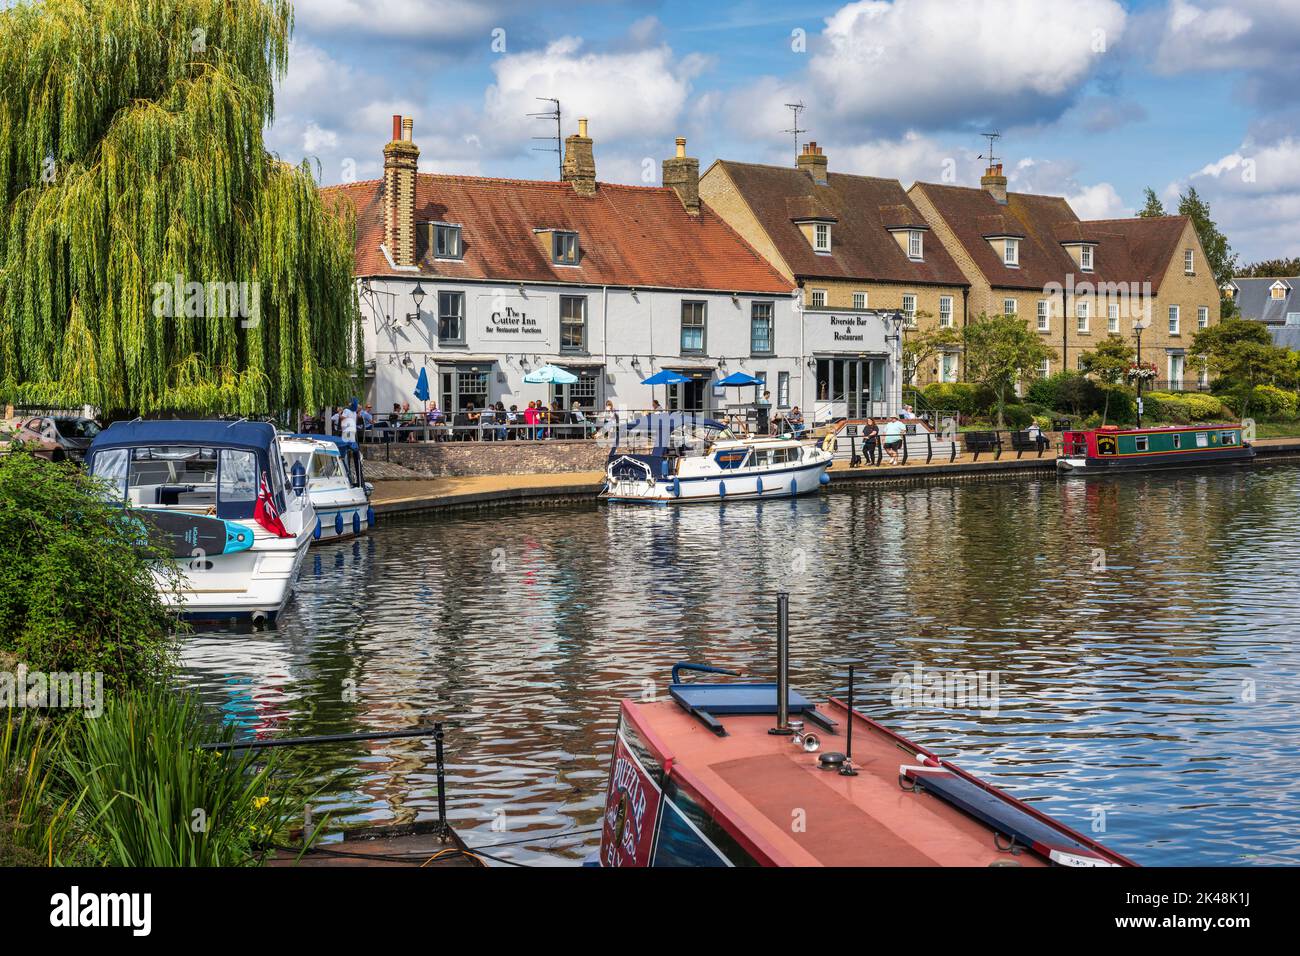 The Cutter Inn bar and restaurant on River Great Ouse in Ely, Cambridgeshire, England, UK Stock Photo